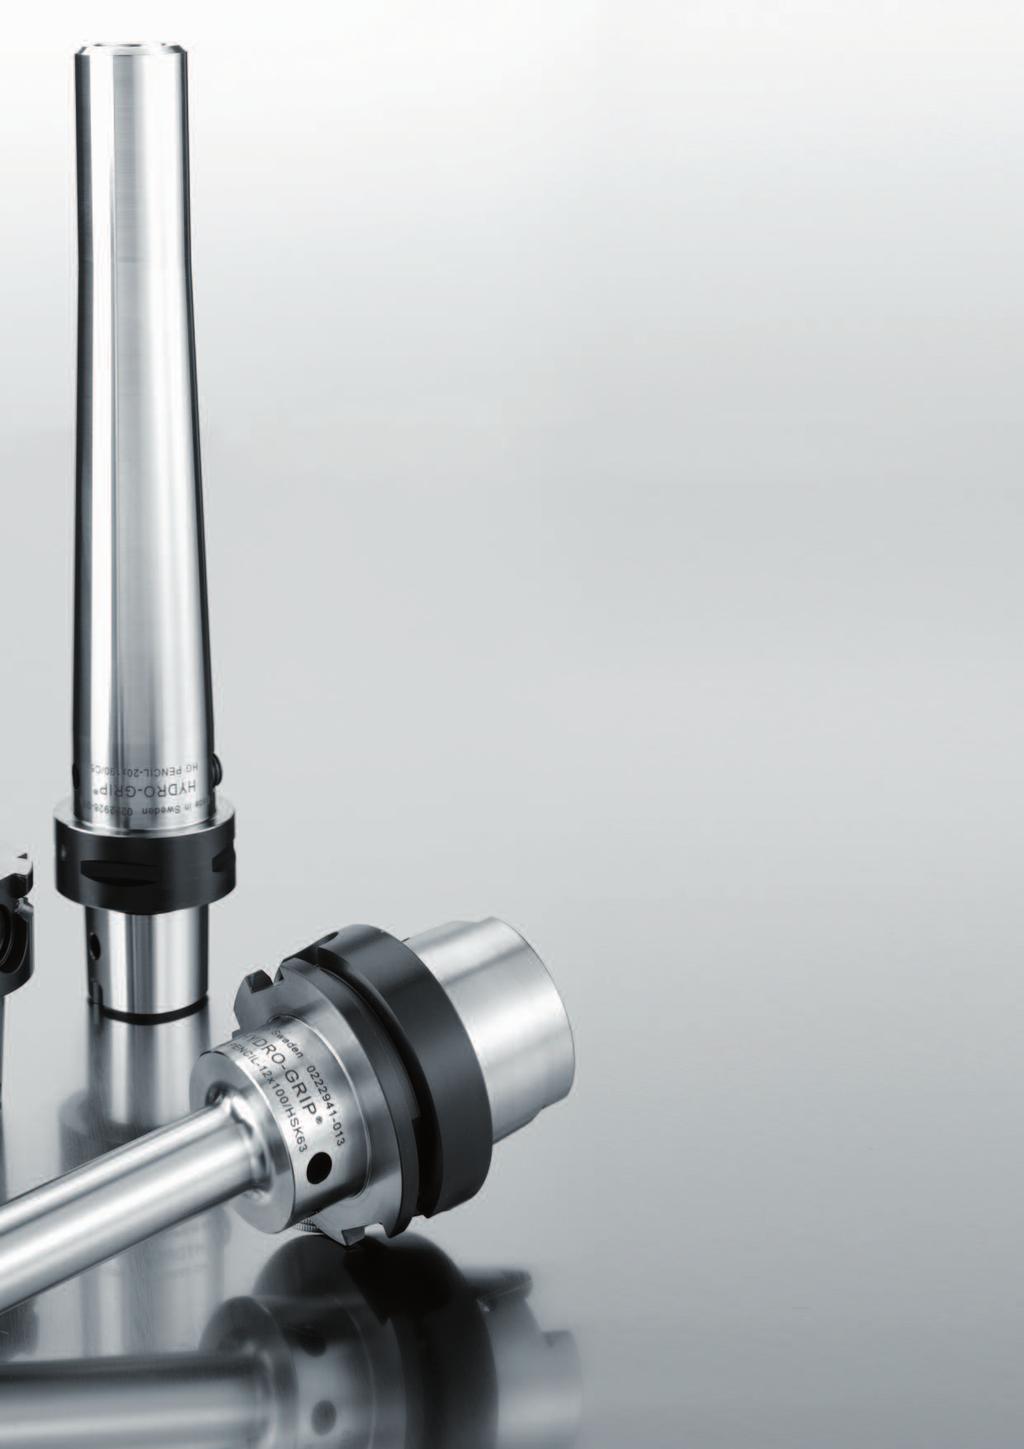 Benefits and features For drilling to finishing Pencil design enabling machining in